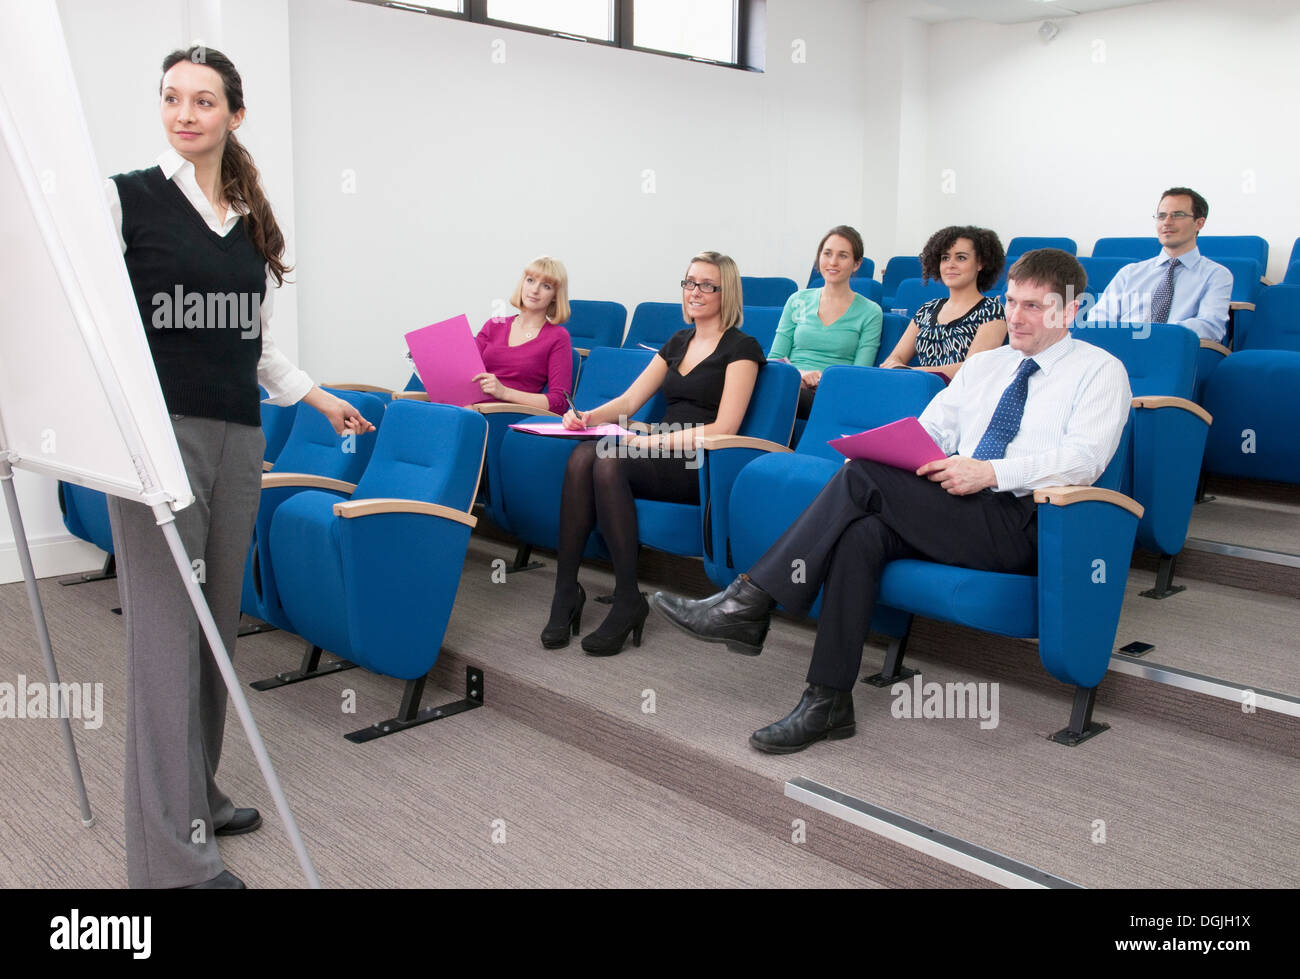 Colleagues in business presentation Stock Photo